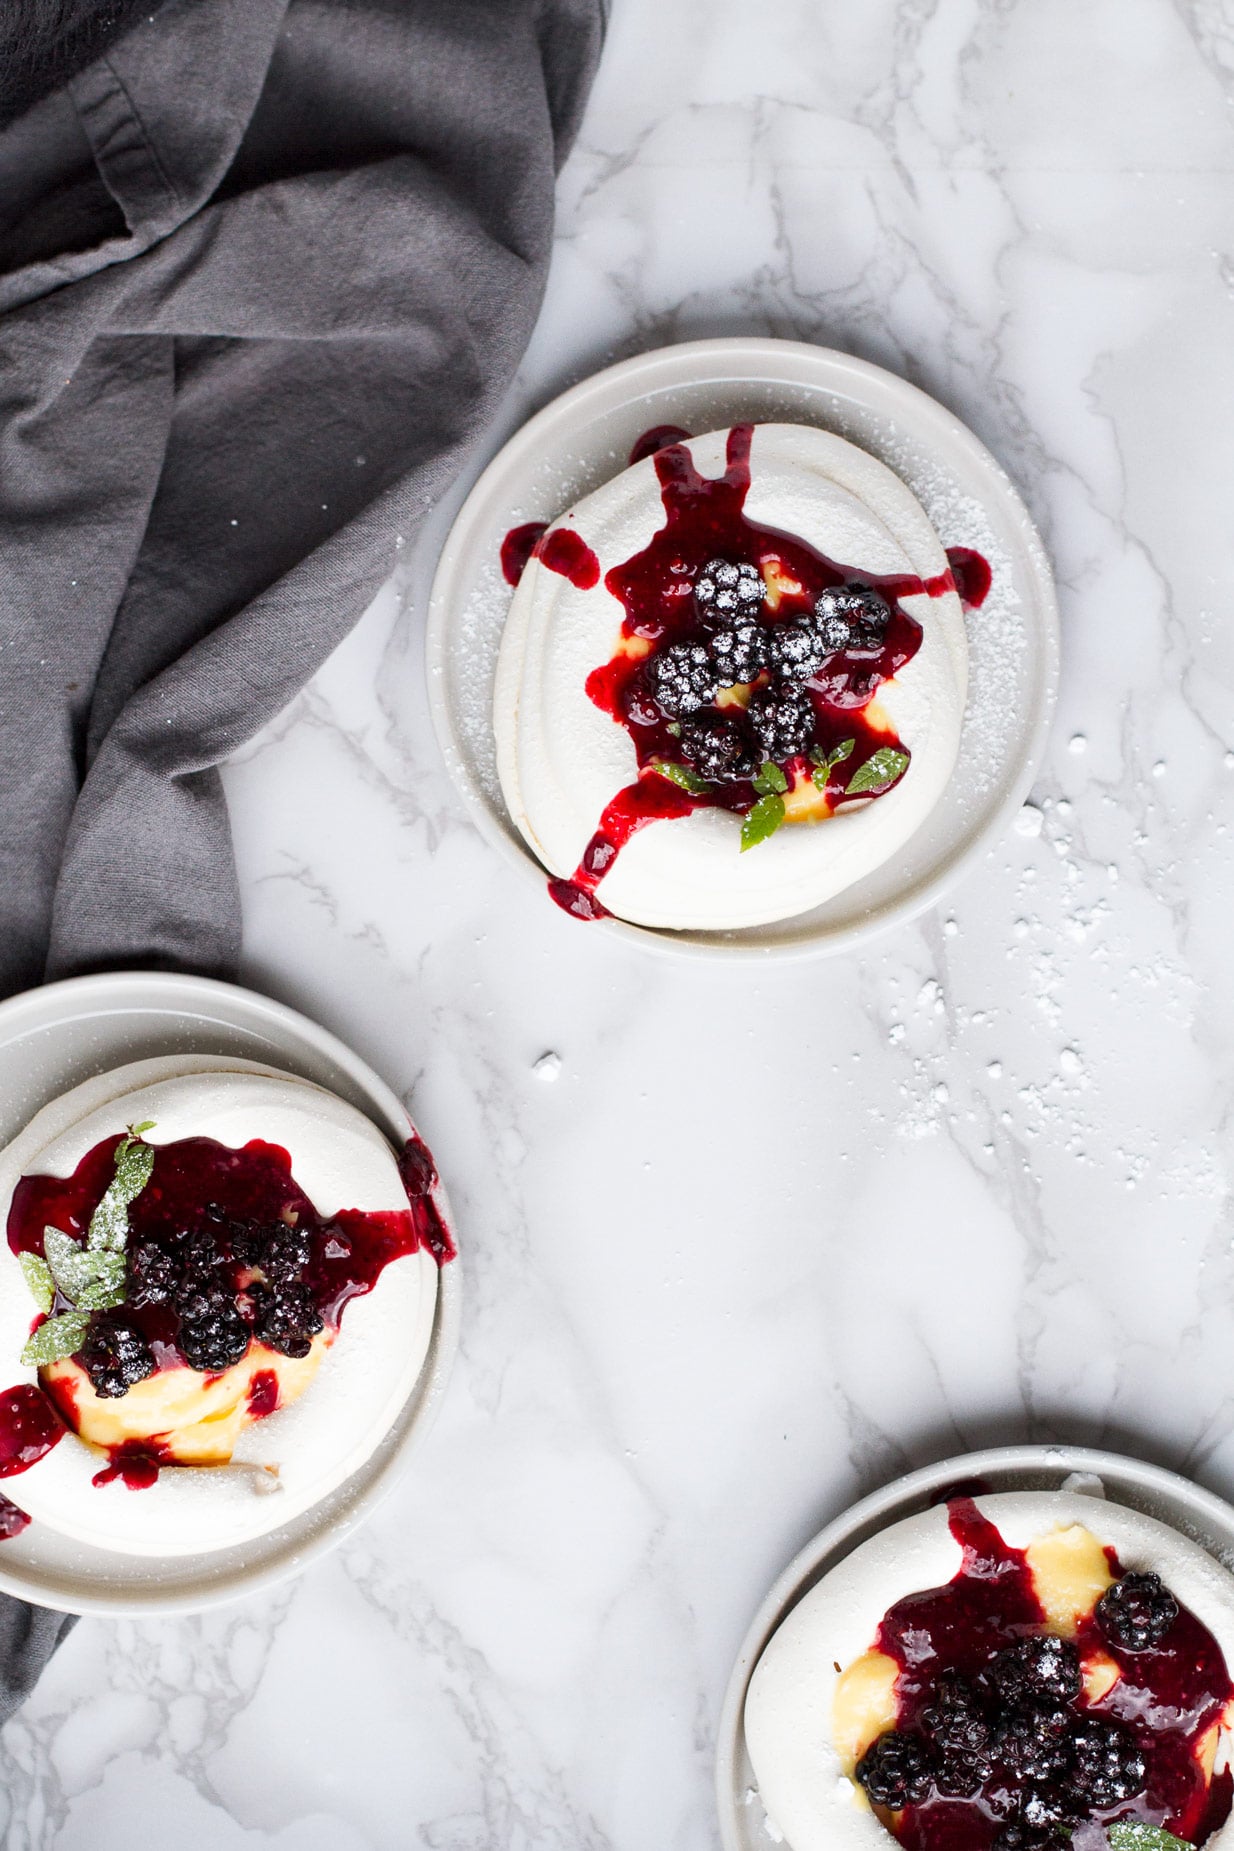 Three plates of pavlova nests with blackberry syrup running down their sides. Flatlay.